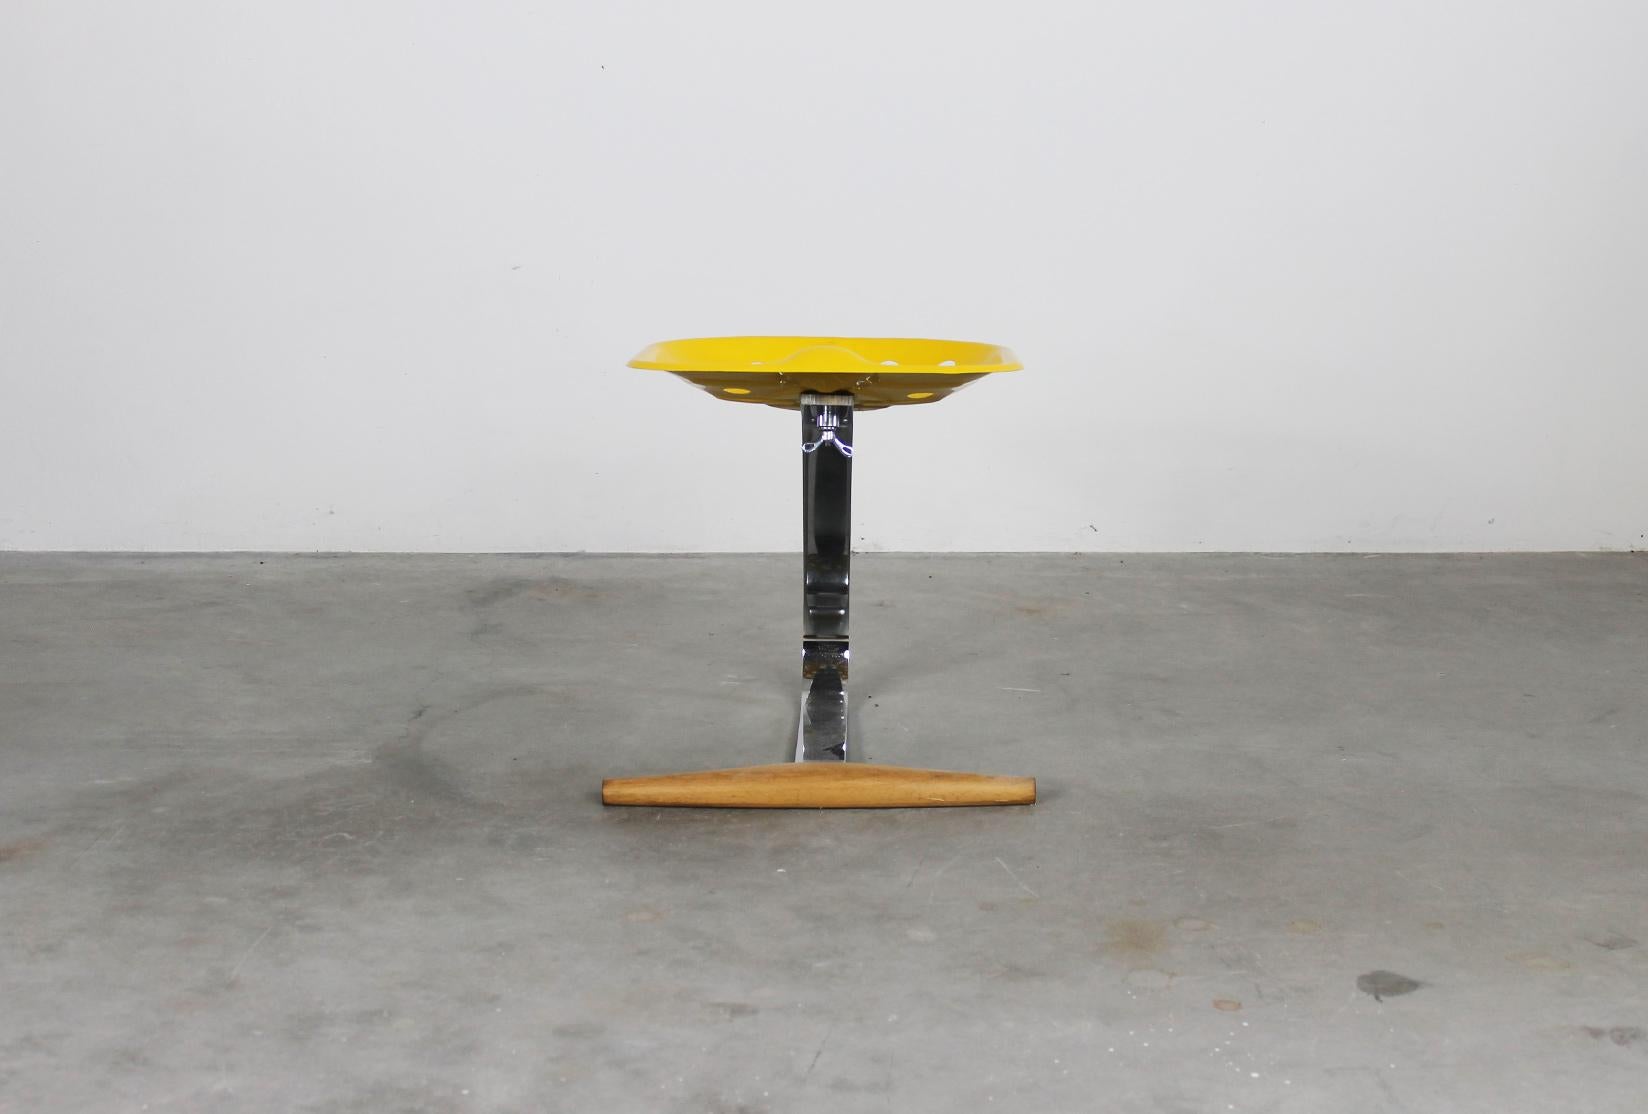 Mezzadro stool with chromium-plated steel stem, seat in yellow lacquered metal and footrest in beech wood. 
Designed by Achille and Piergiacomo Castiglioni in 1957 and produced by Zanotta in 1970s.

In 1970 Zanotta put the “springy metal seat”,